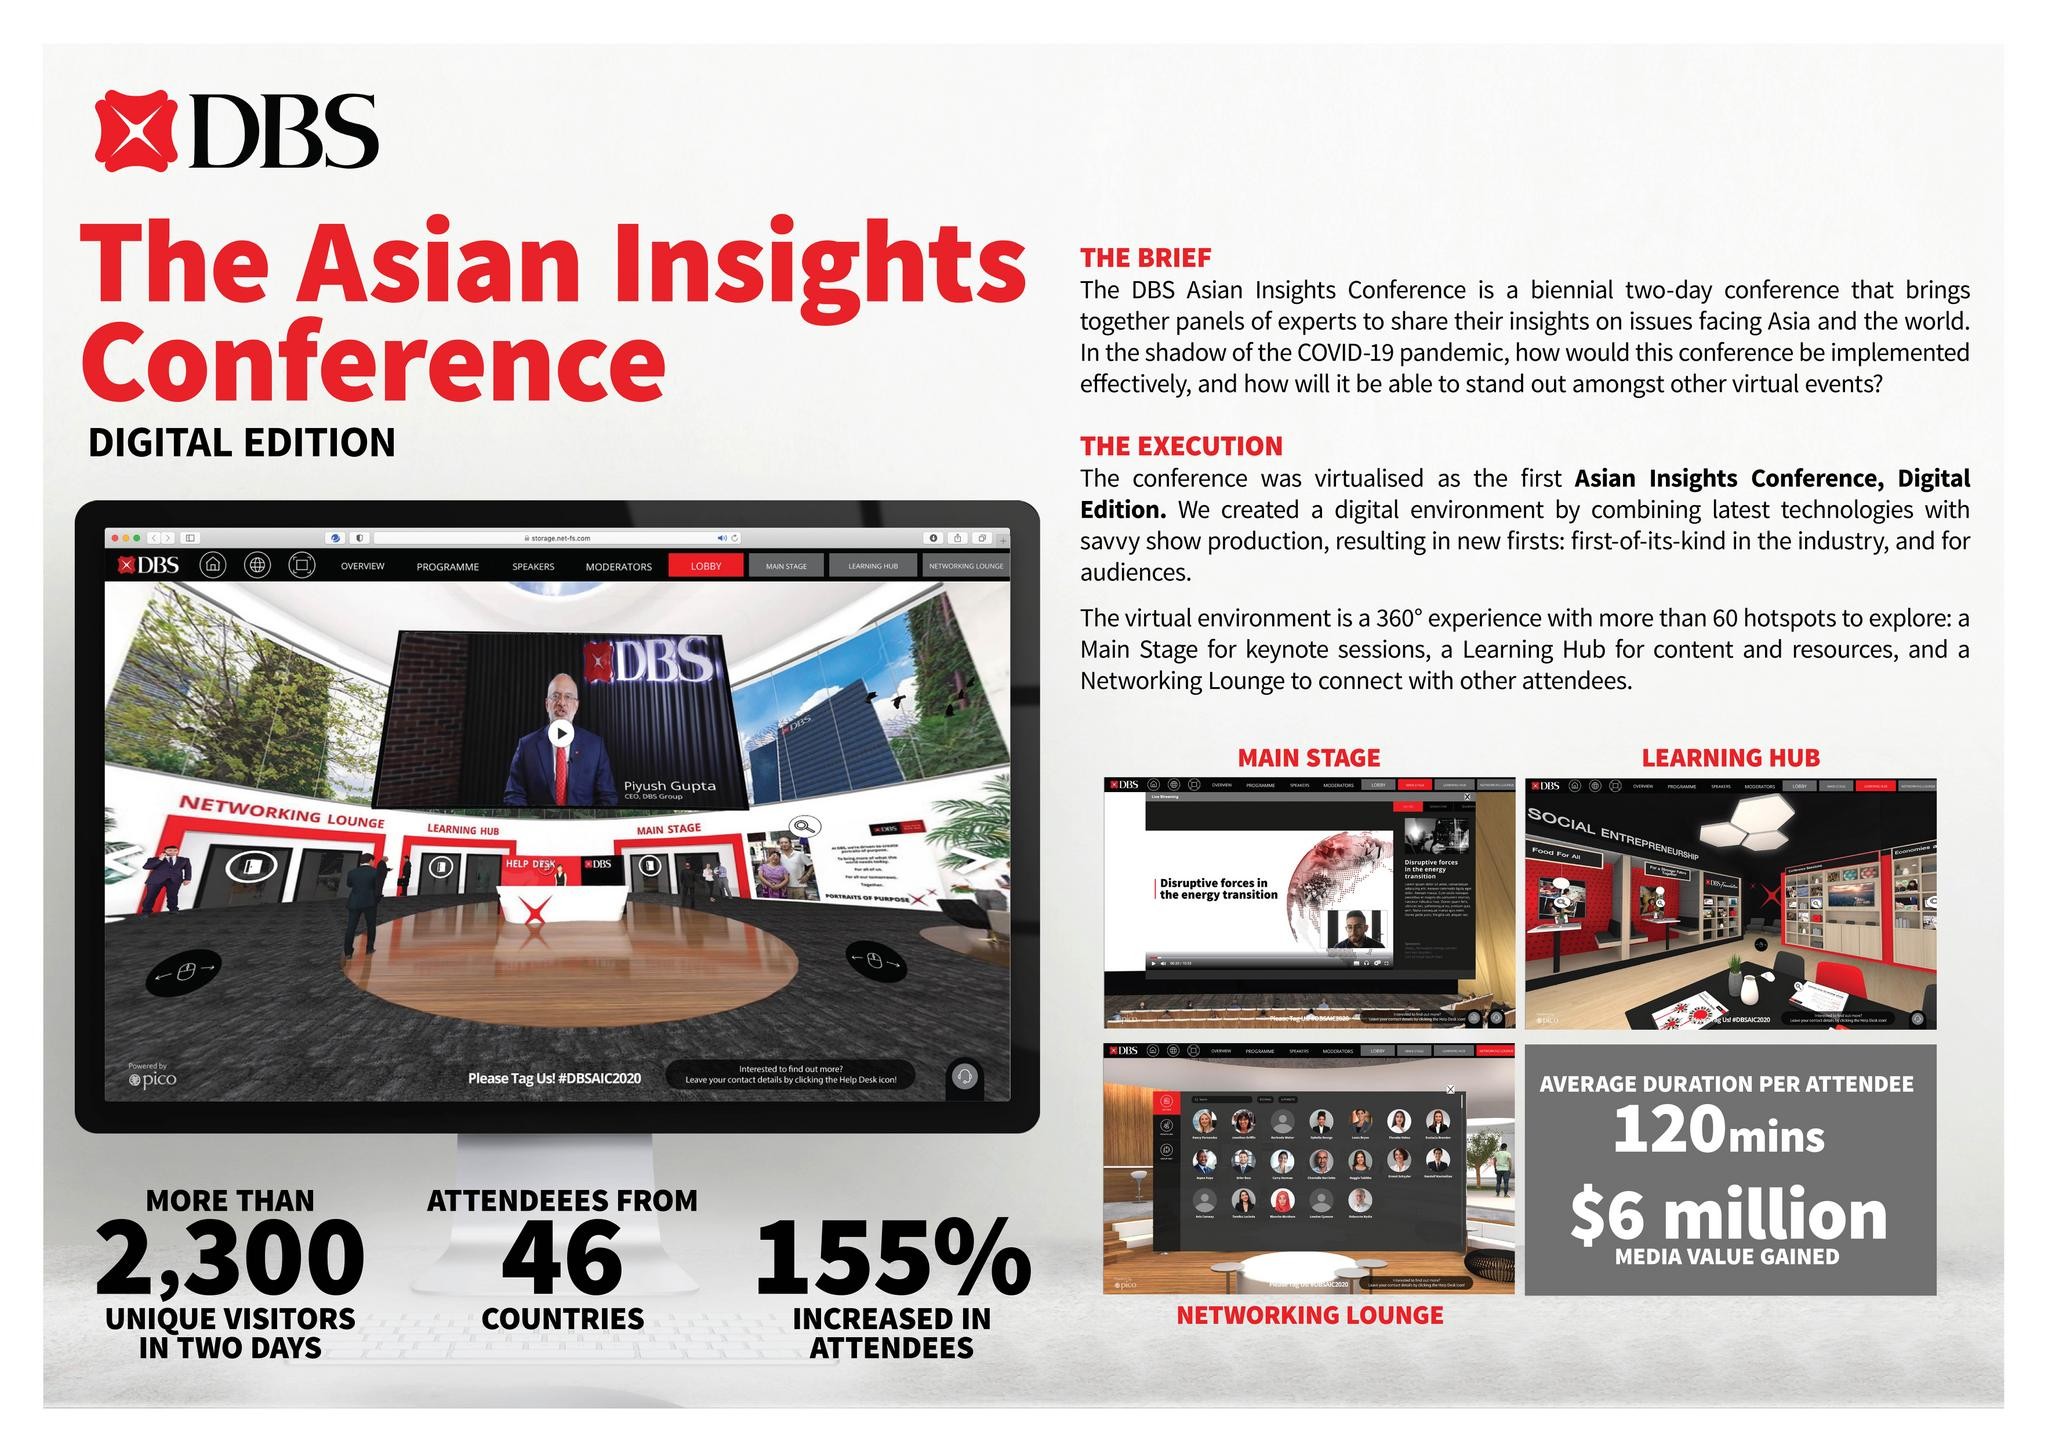 DBS Asian Insights Conference 2020 (digital edition)